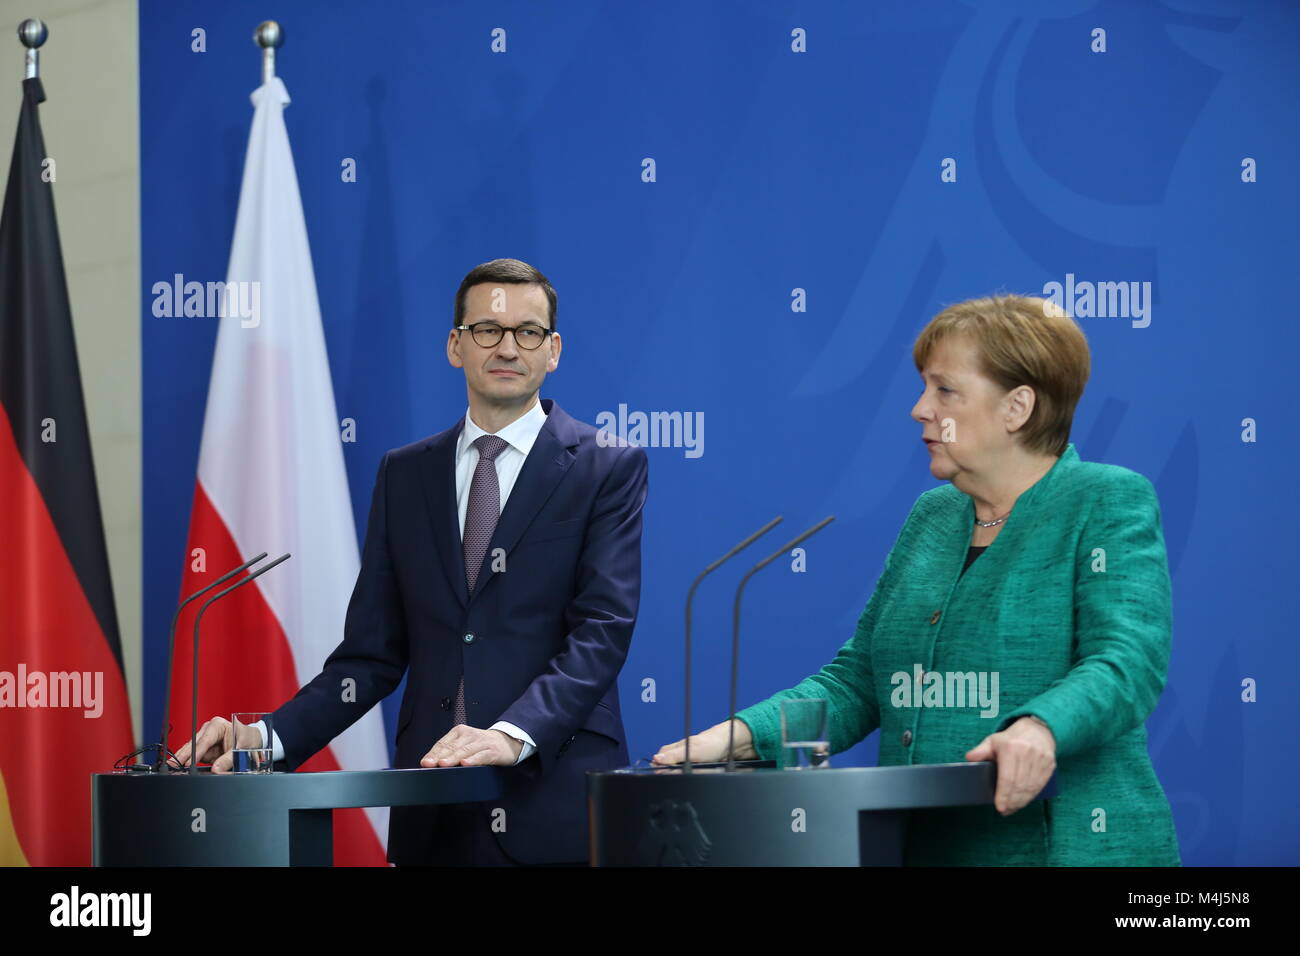 Berlin, Germany. 16th Feb, 2018. Berlin: Chancellor Angela Merkel and Prime Minister of the Republic of Poland, Mateusz Morawieck, at the Federal Chancellery press conference in Berlin. Credit: Simone Kuhlmey/Pacific Press/Alamy Live News Stock Photo